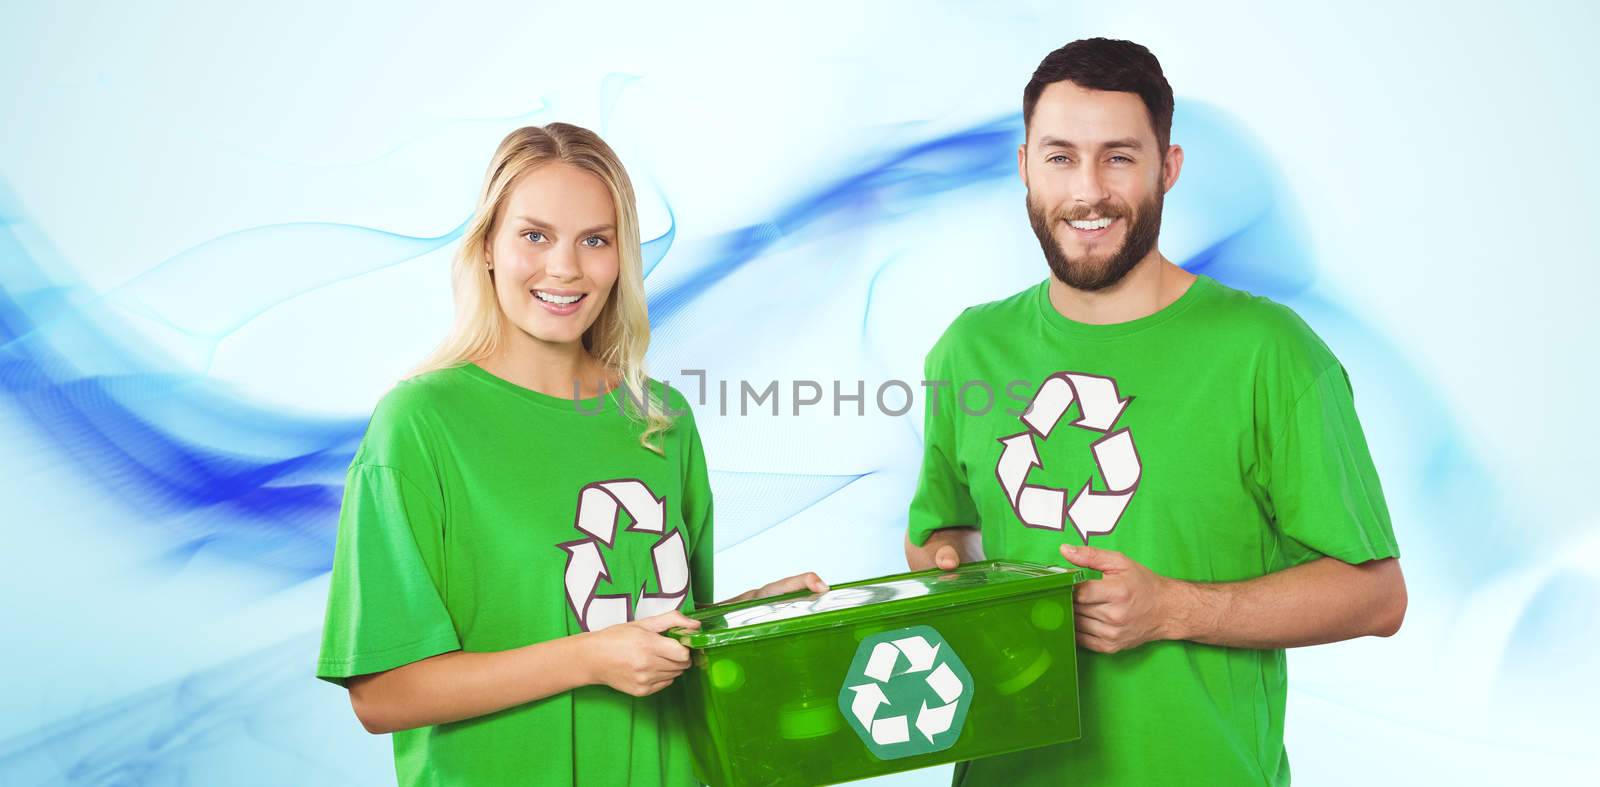 Portrait of smiling volunteers carrying recycling container  against blue abstract design